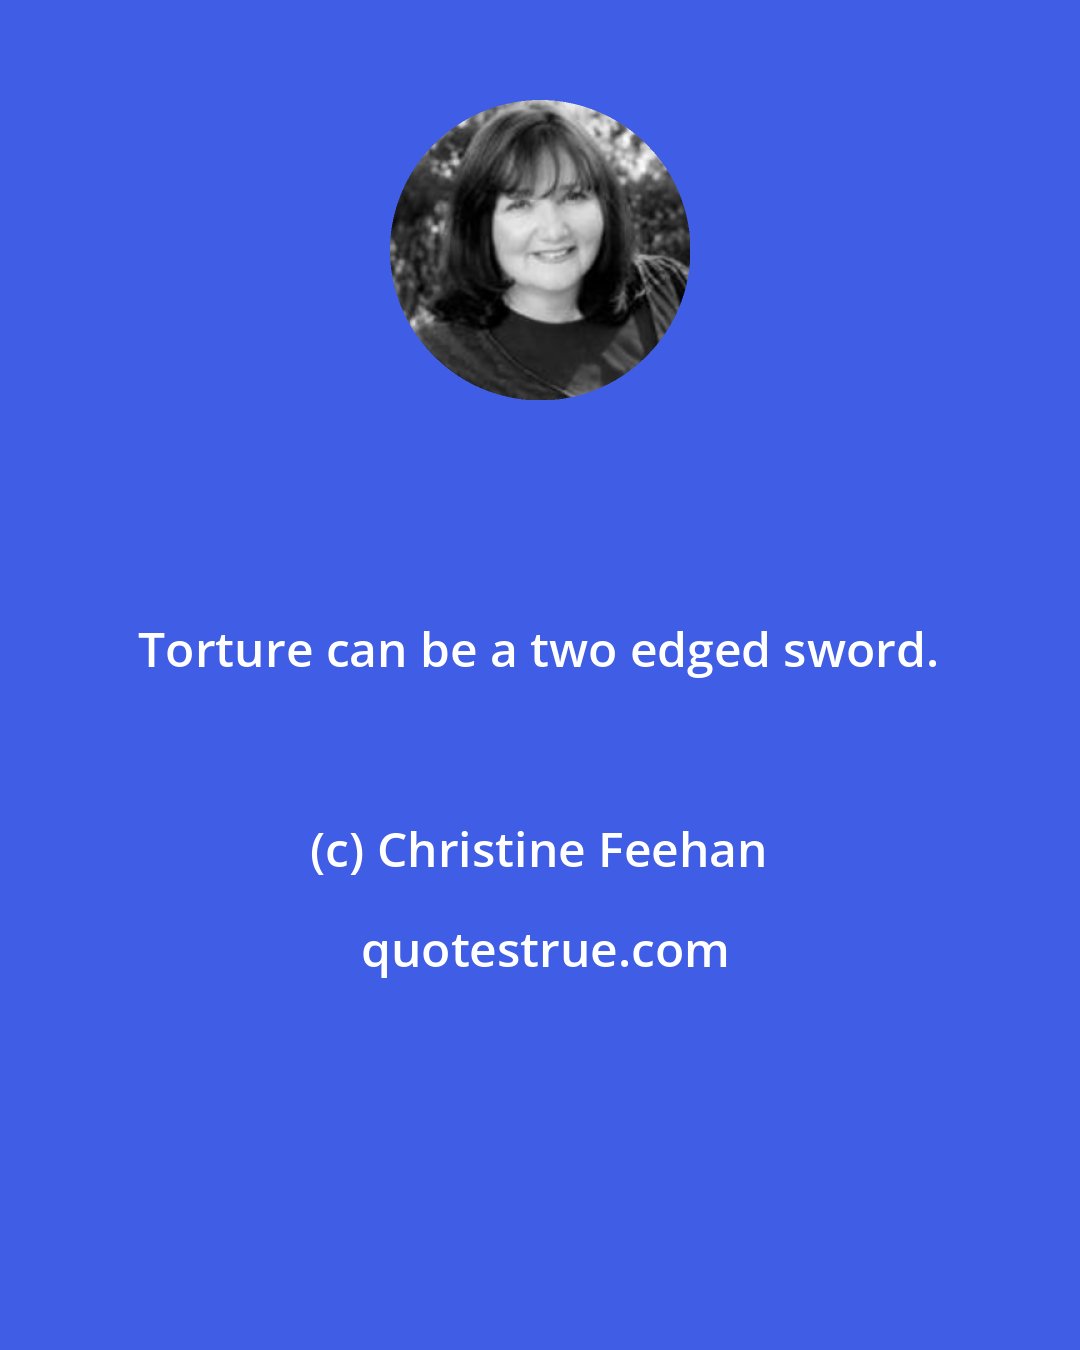 Christine Feehan: Torture can be a two edged sword.